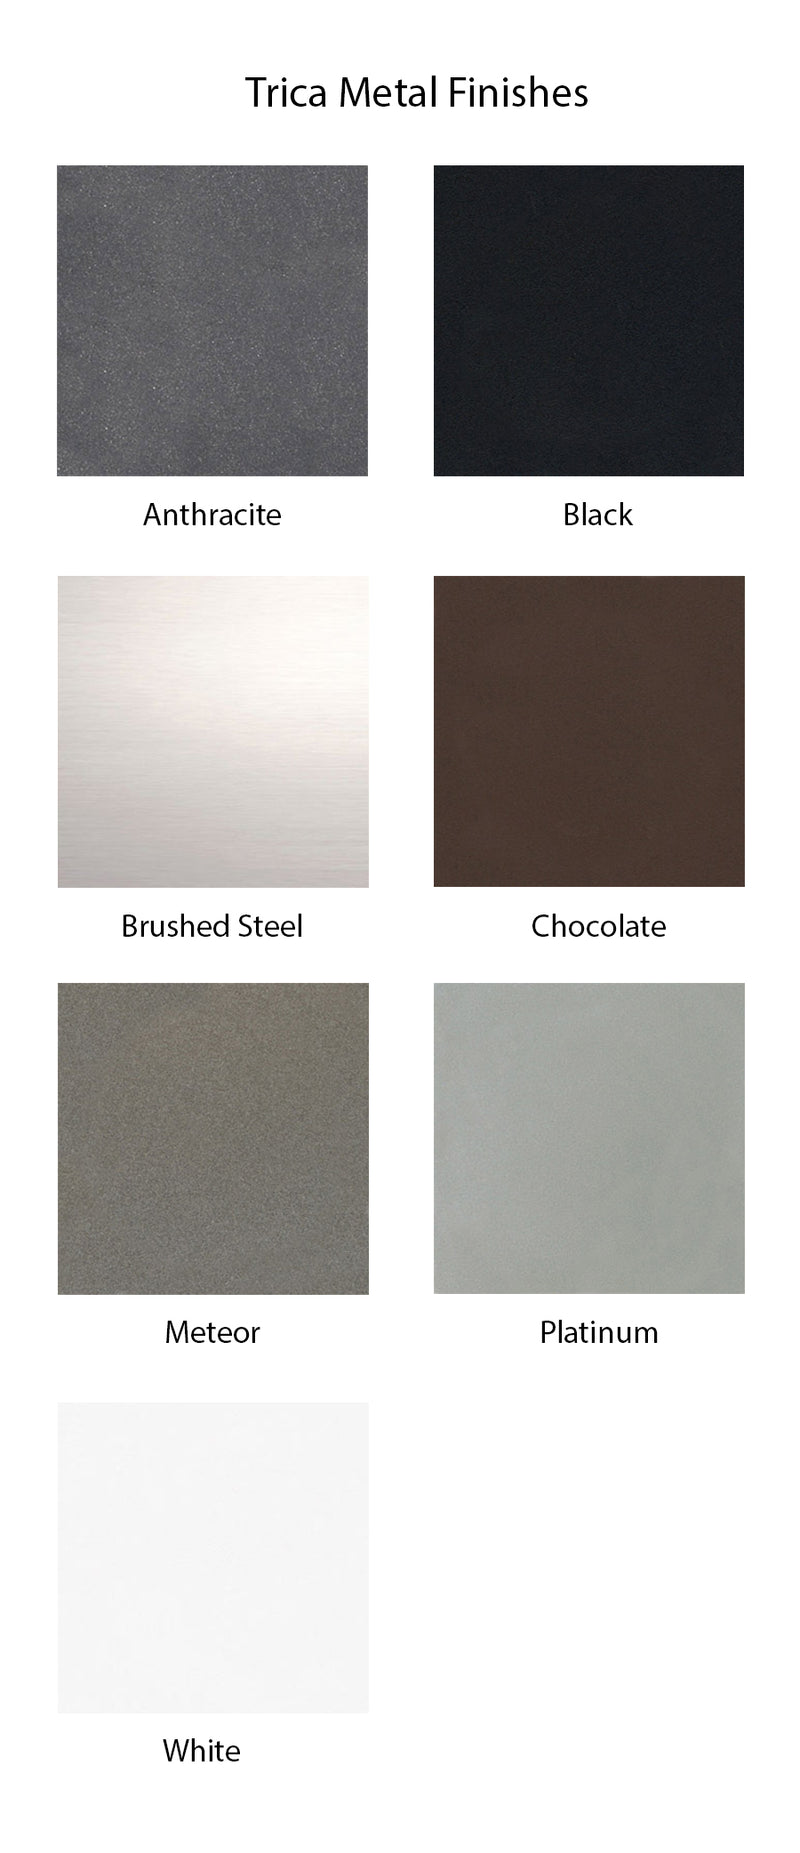 products/metal-finishes-trica_7b311903-8db3-4e94-9685-214118c890bc.jpg